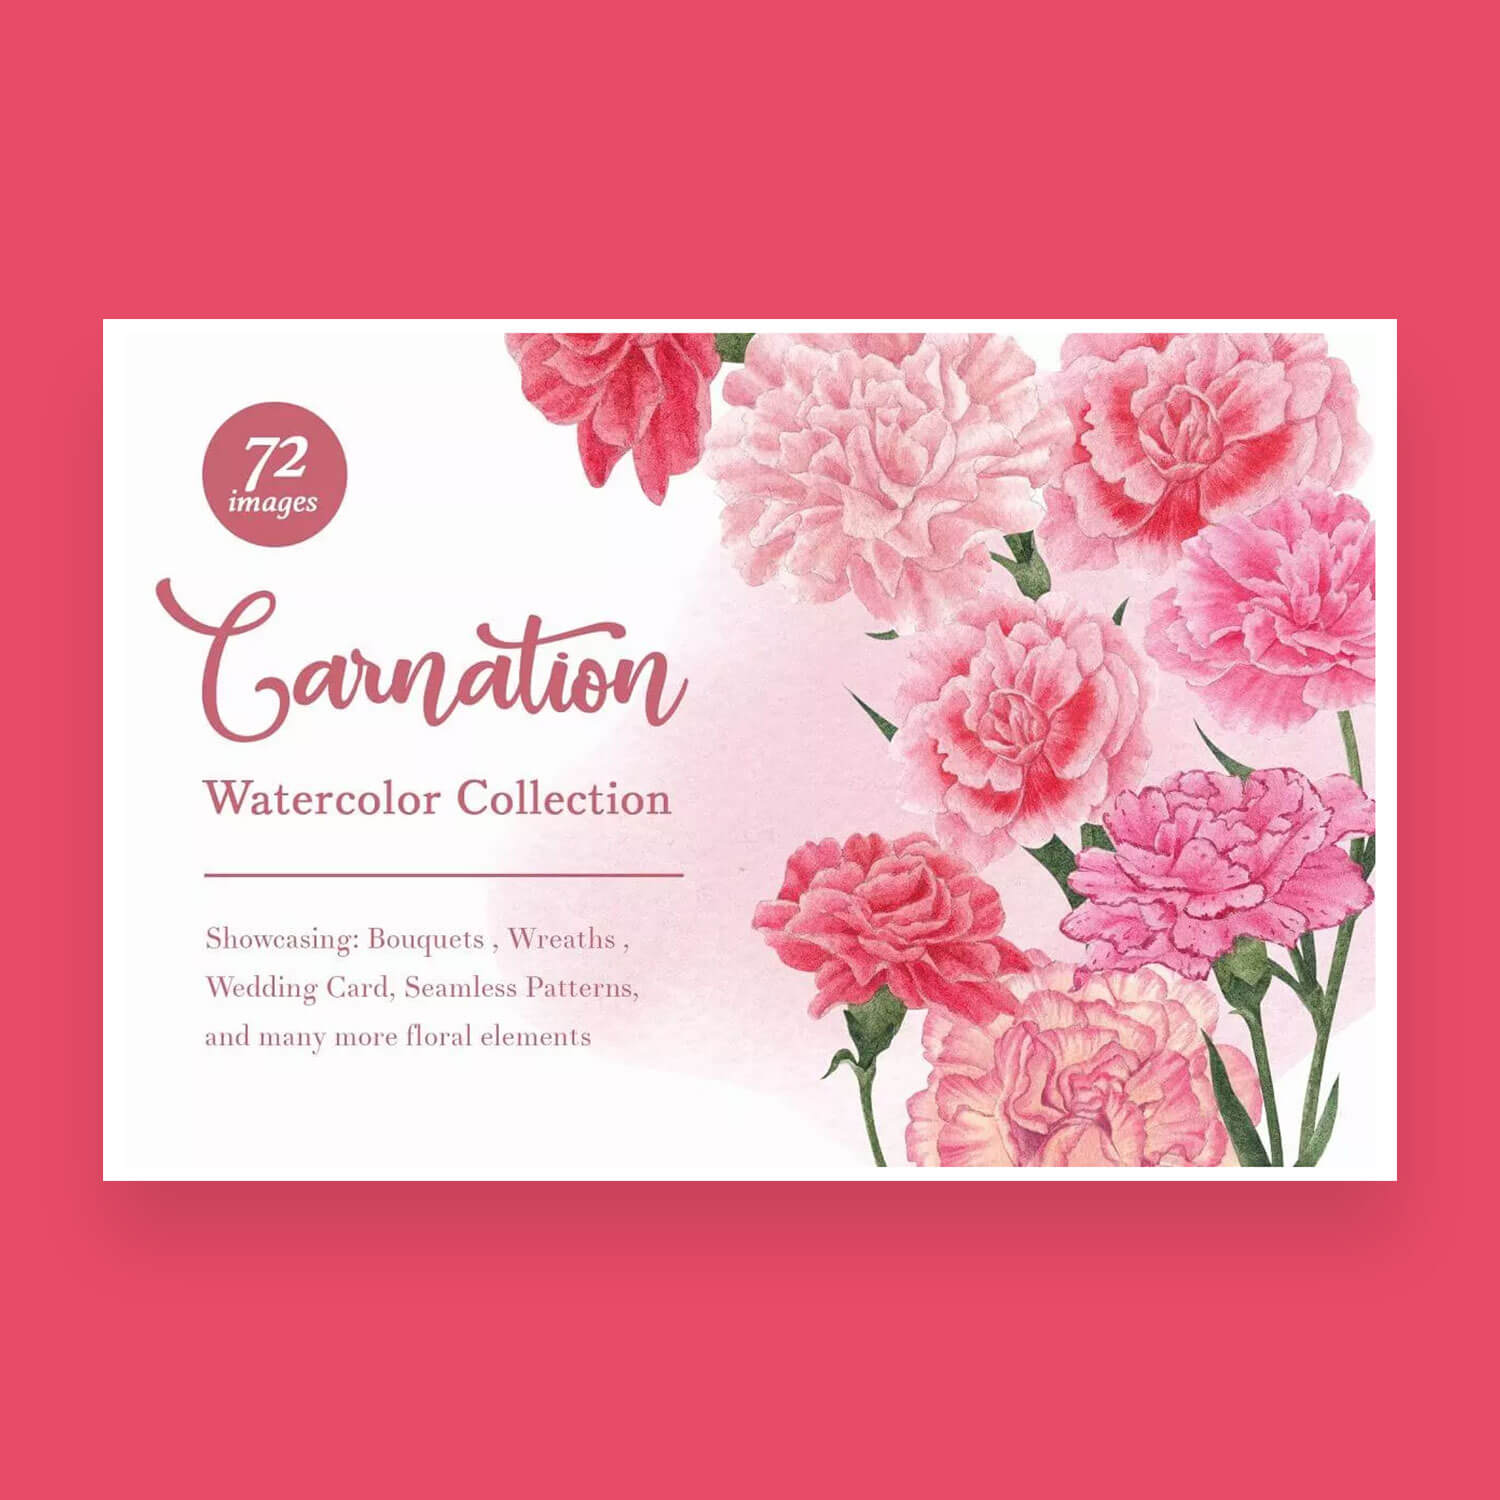 A large bouquet of carnations is on the right side, and on the left is a text about the design with watercolor flowers.